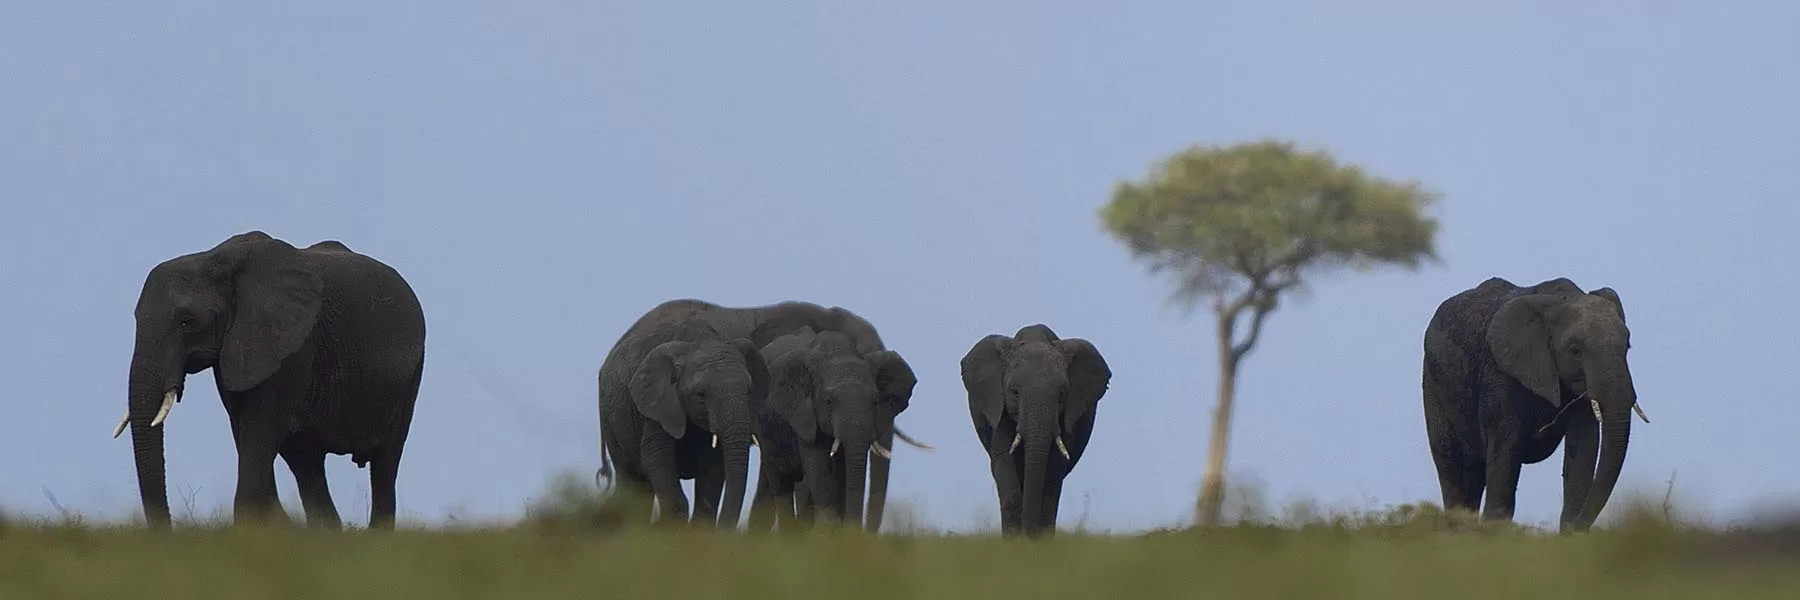 Best places to see elephants in Africa